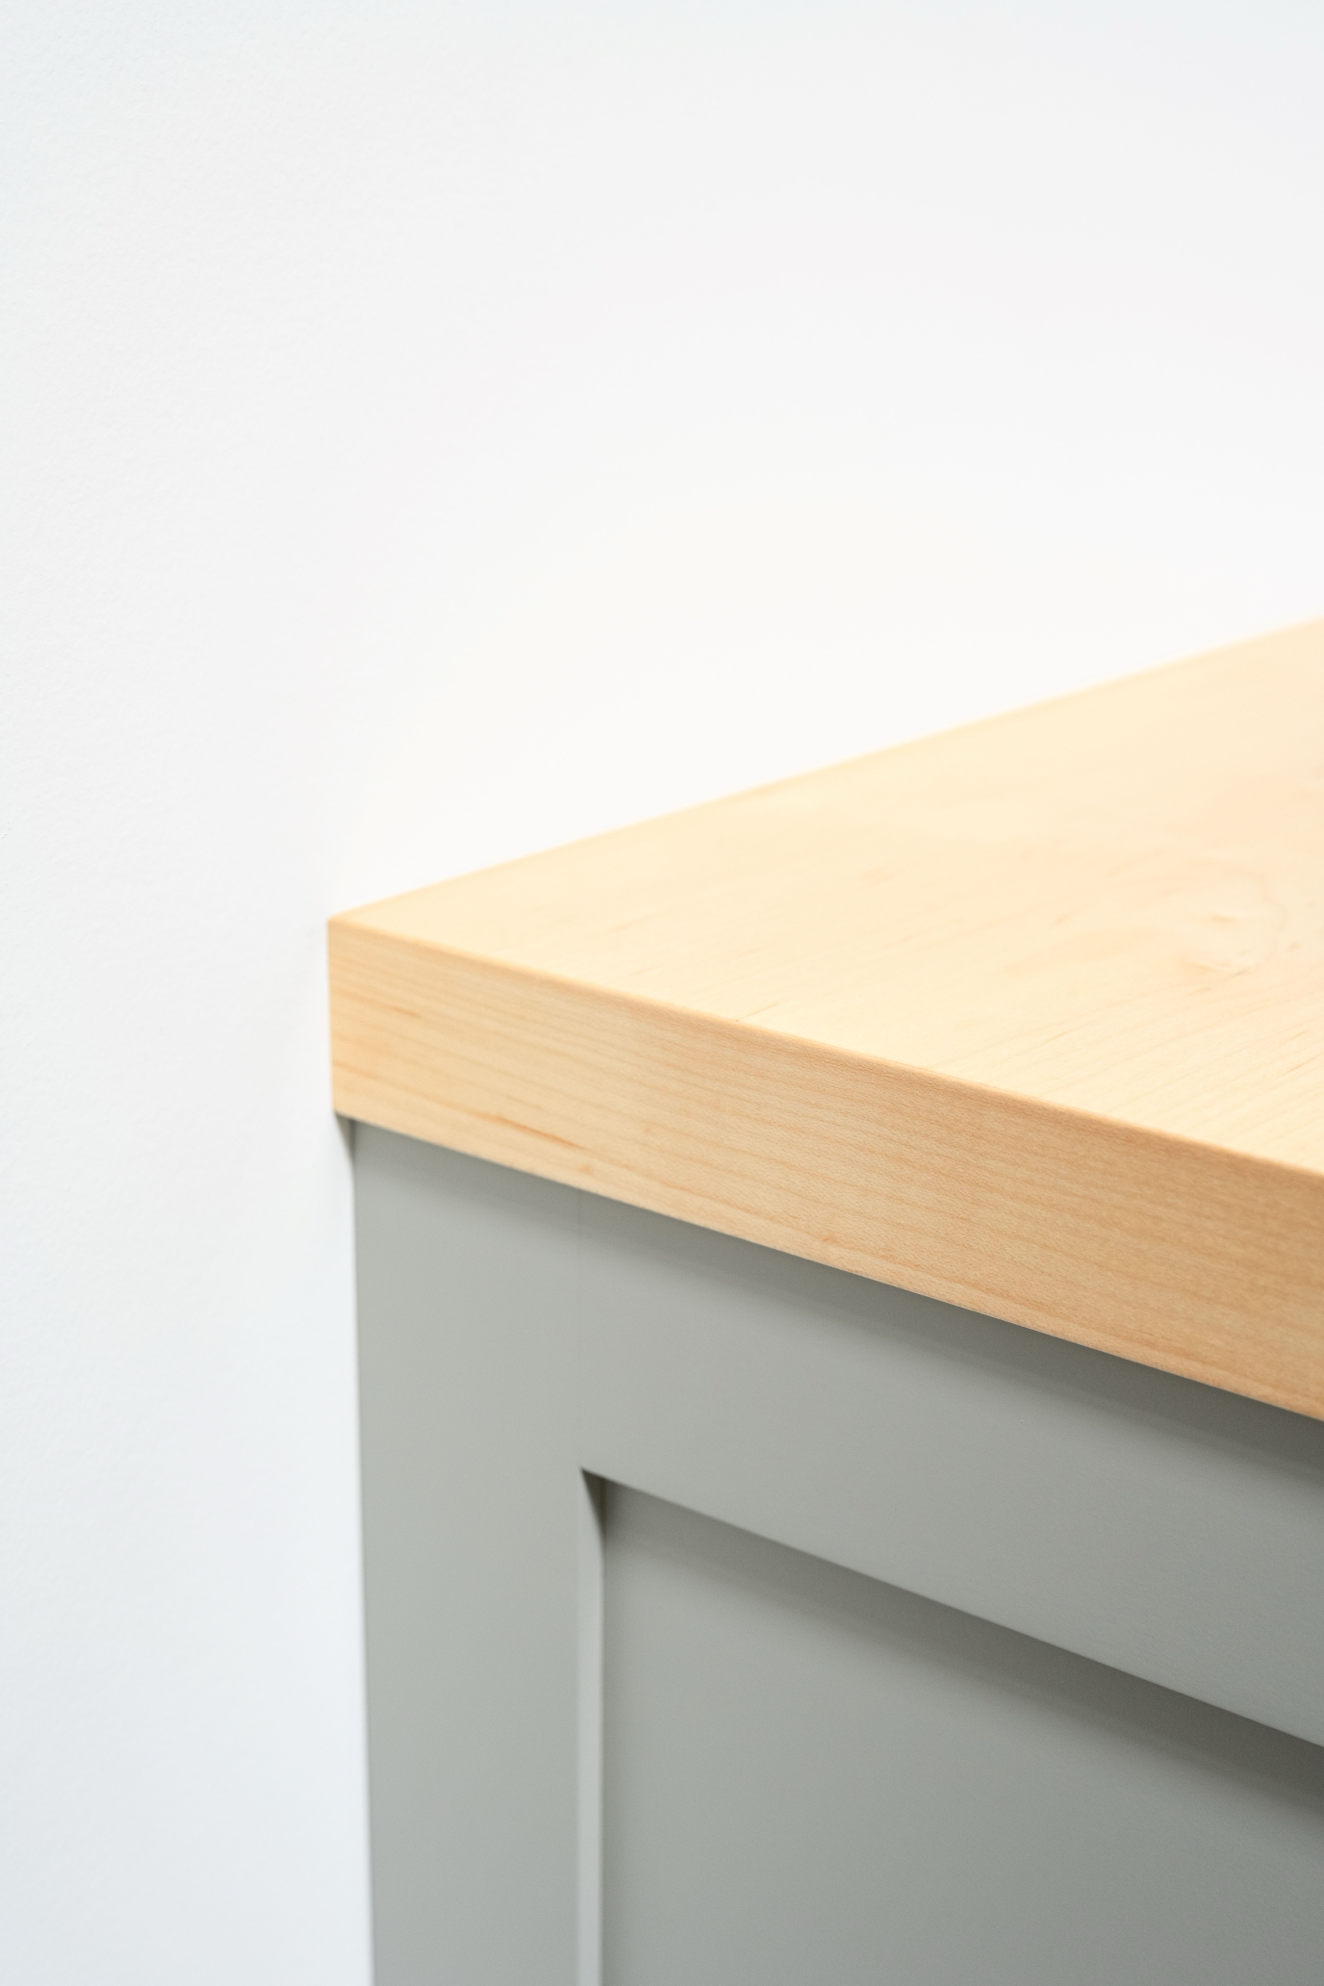 Maple 1.75" thick Cabinet Top / Slab Shelf